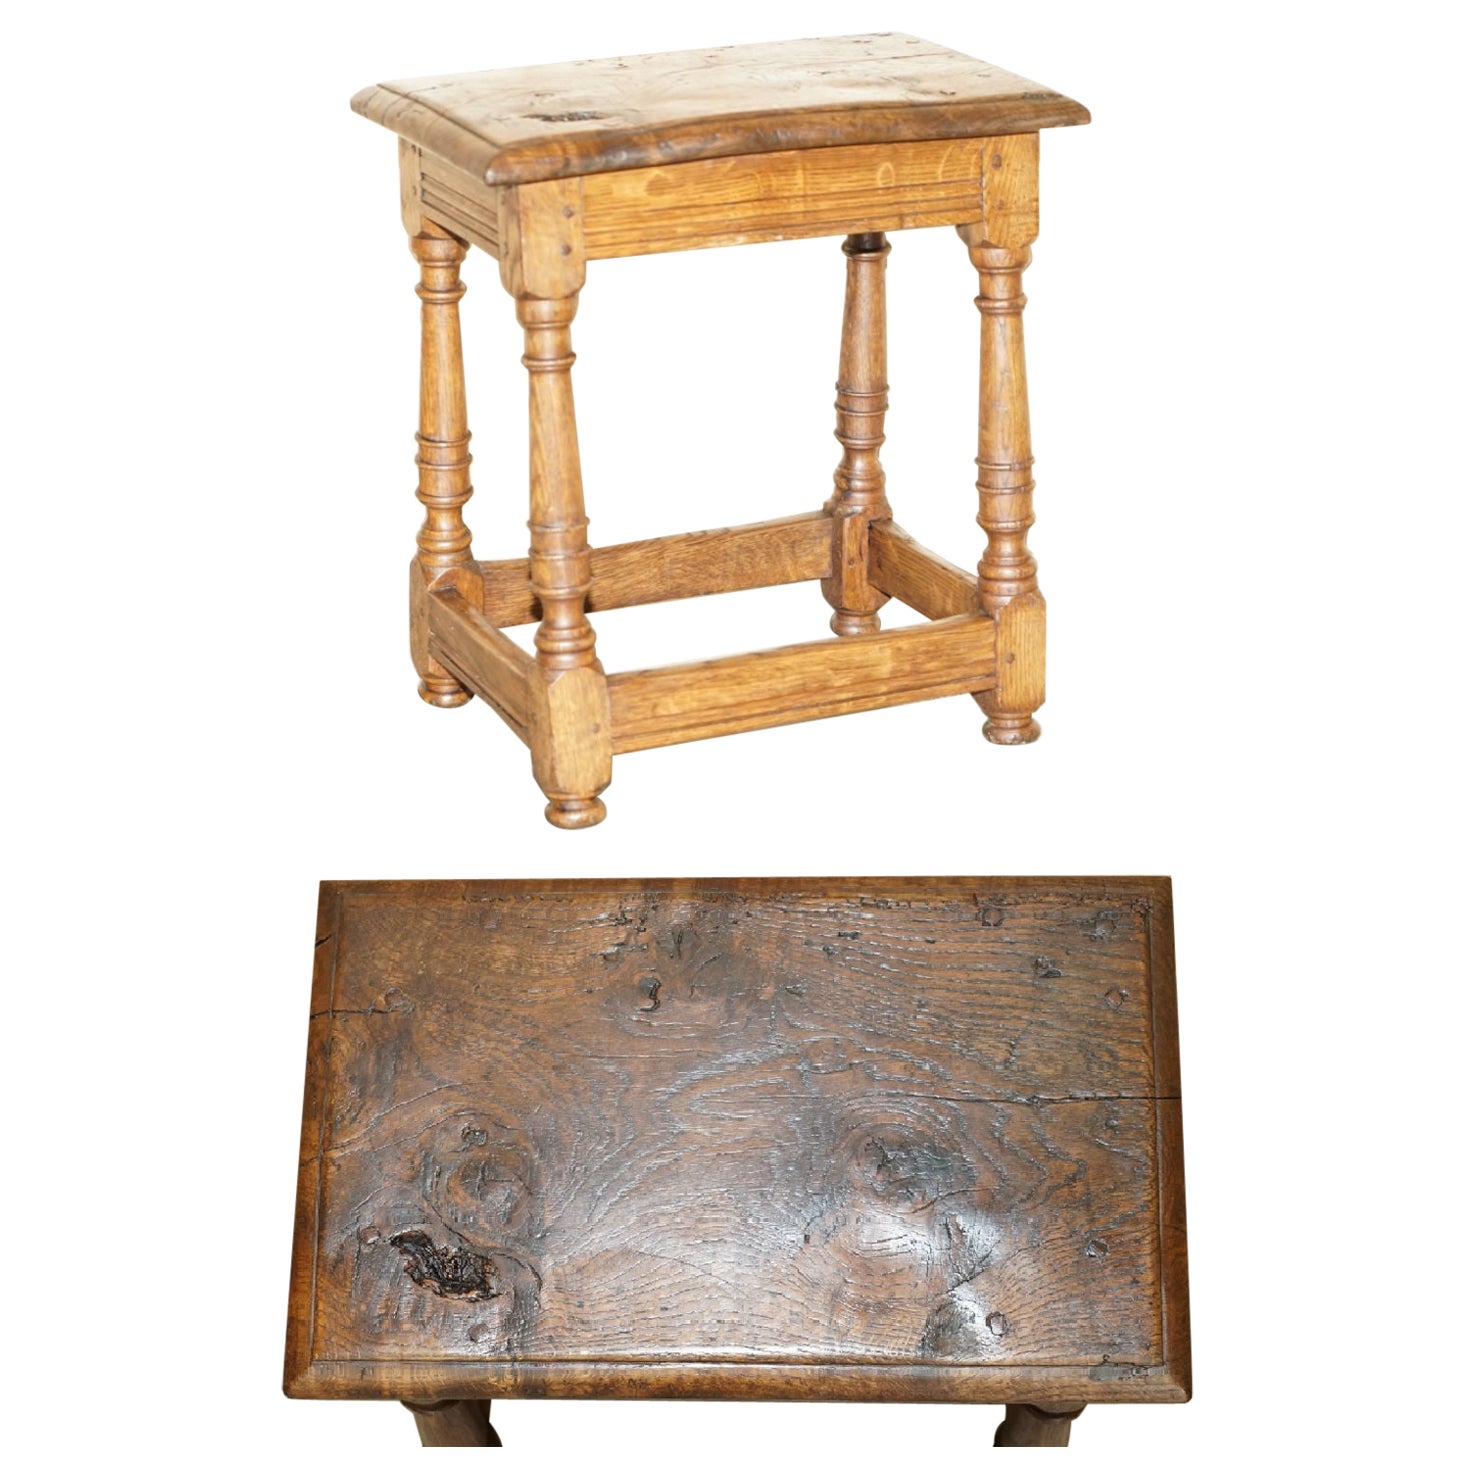 STUNNiNG HEAVILY BURRED OAK ANTIQUE 18TH CENTURY CIRCA 1780 JOINTED STOOL TABLE For Sale